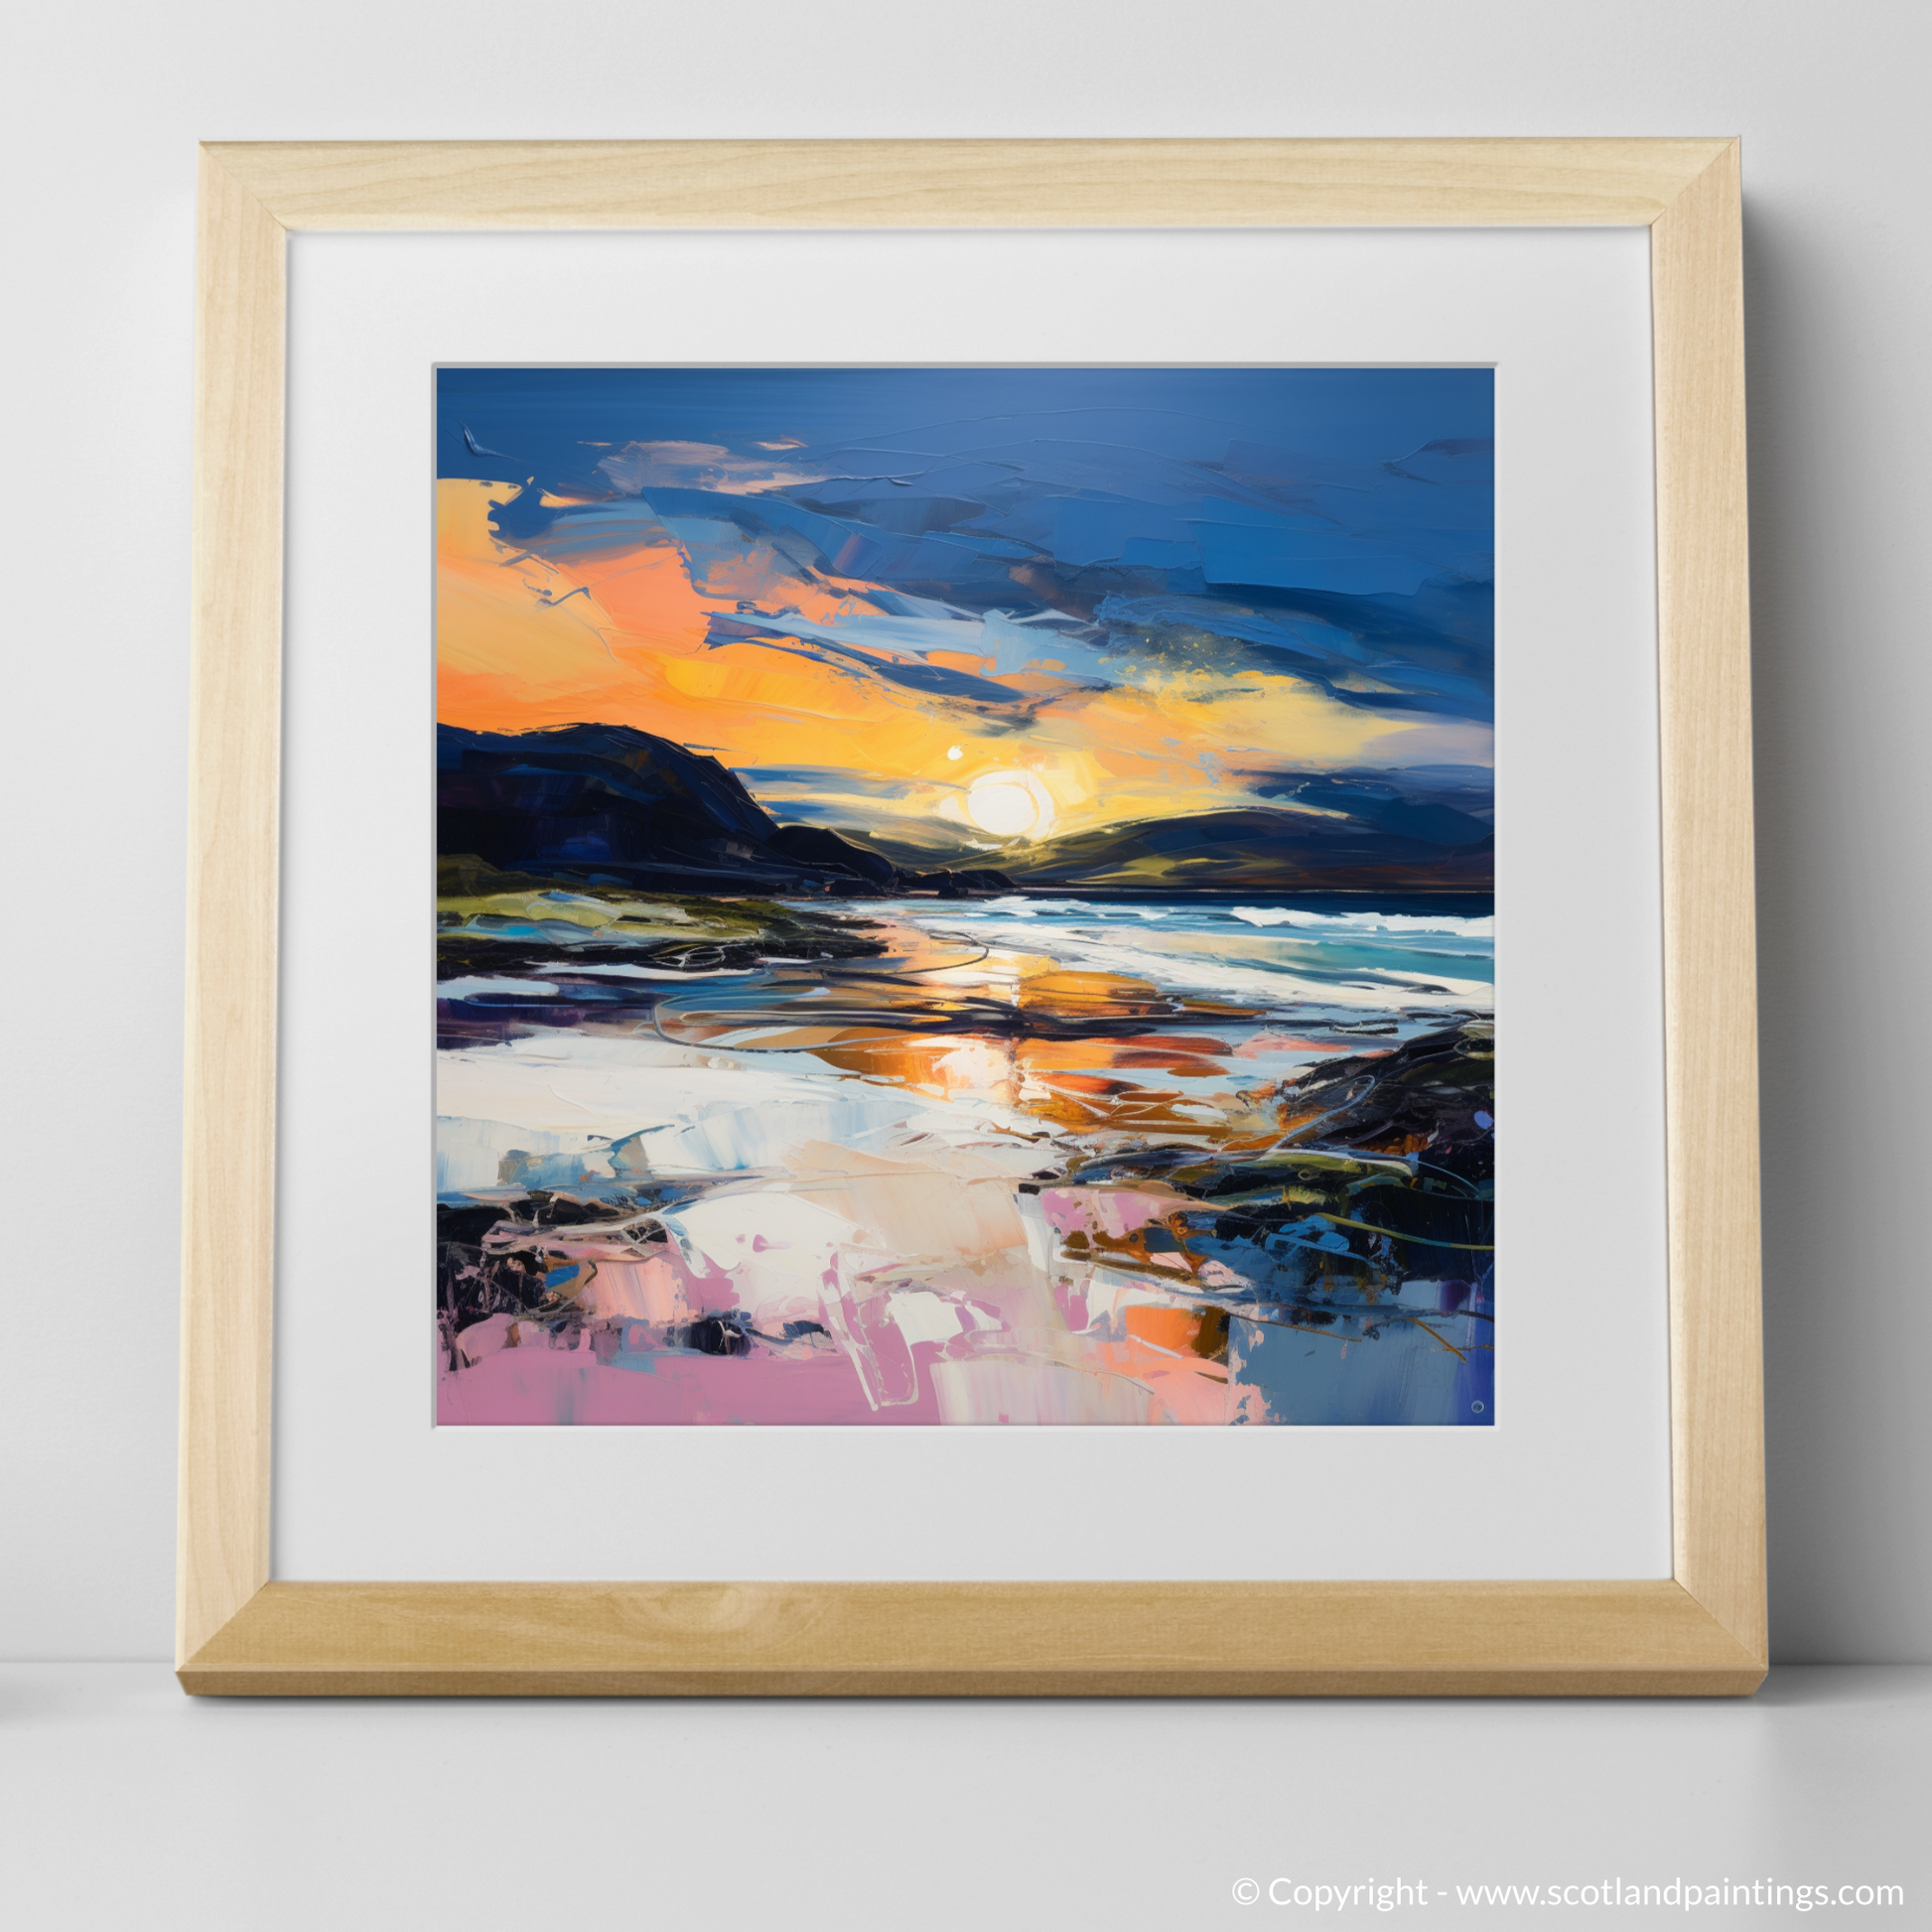 Art Print of Scarista Beach at dusk with a natural frame